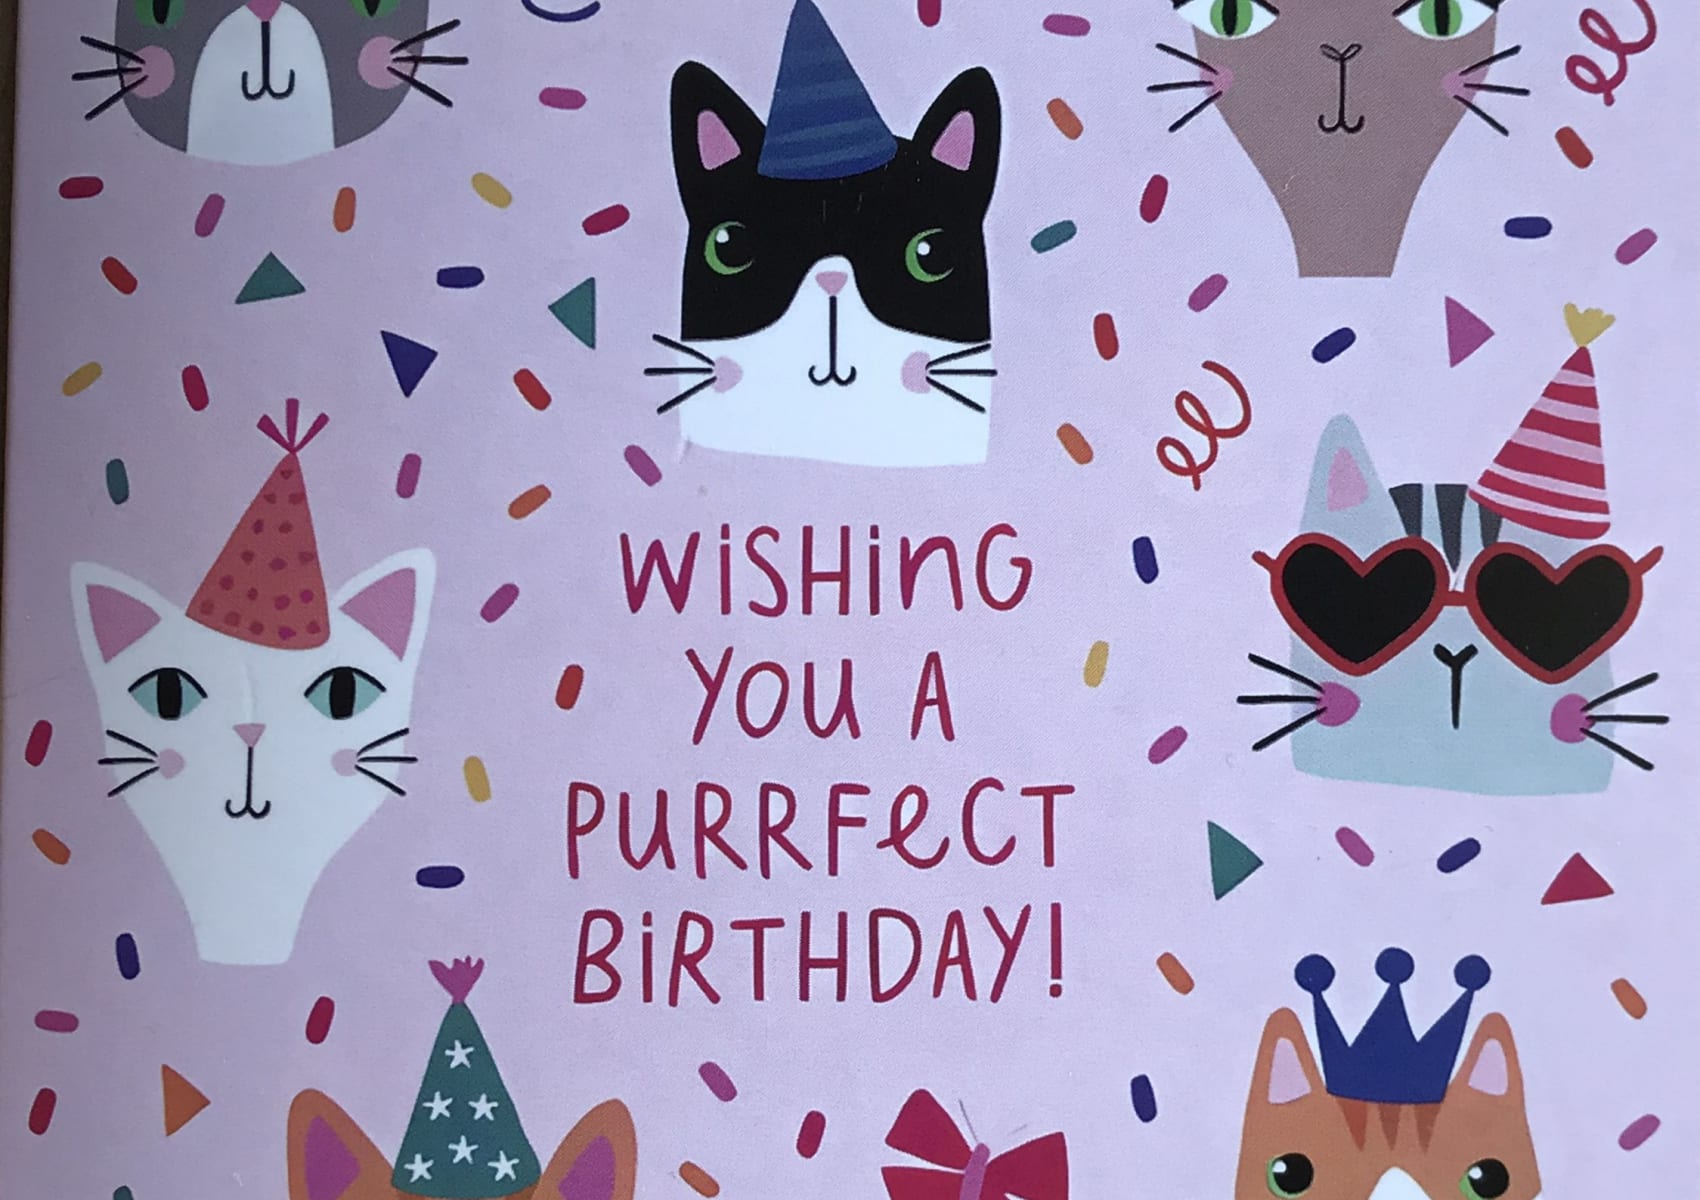 Pink birthday card wishing you a Purrfect Birthday with lots of cats